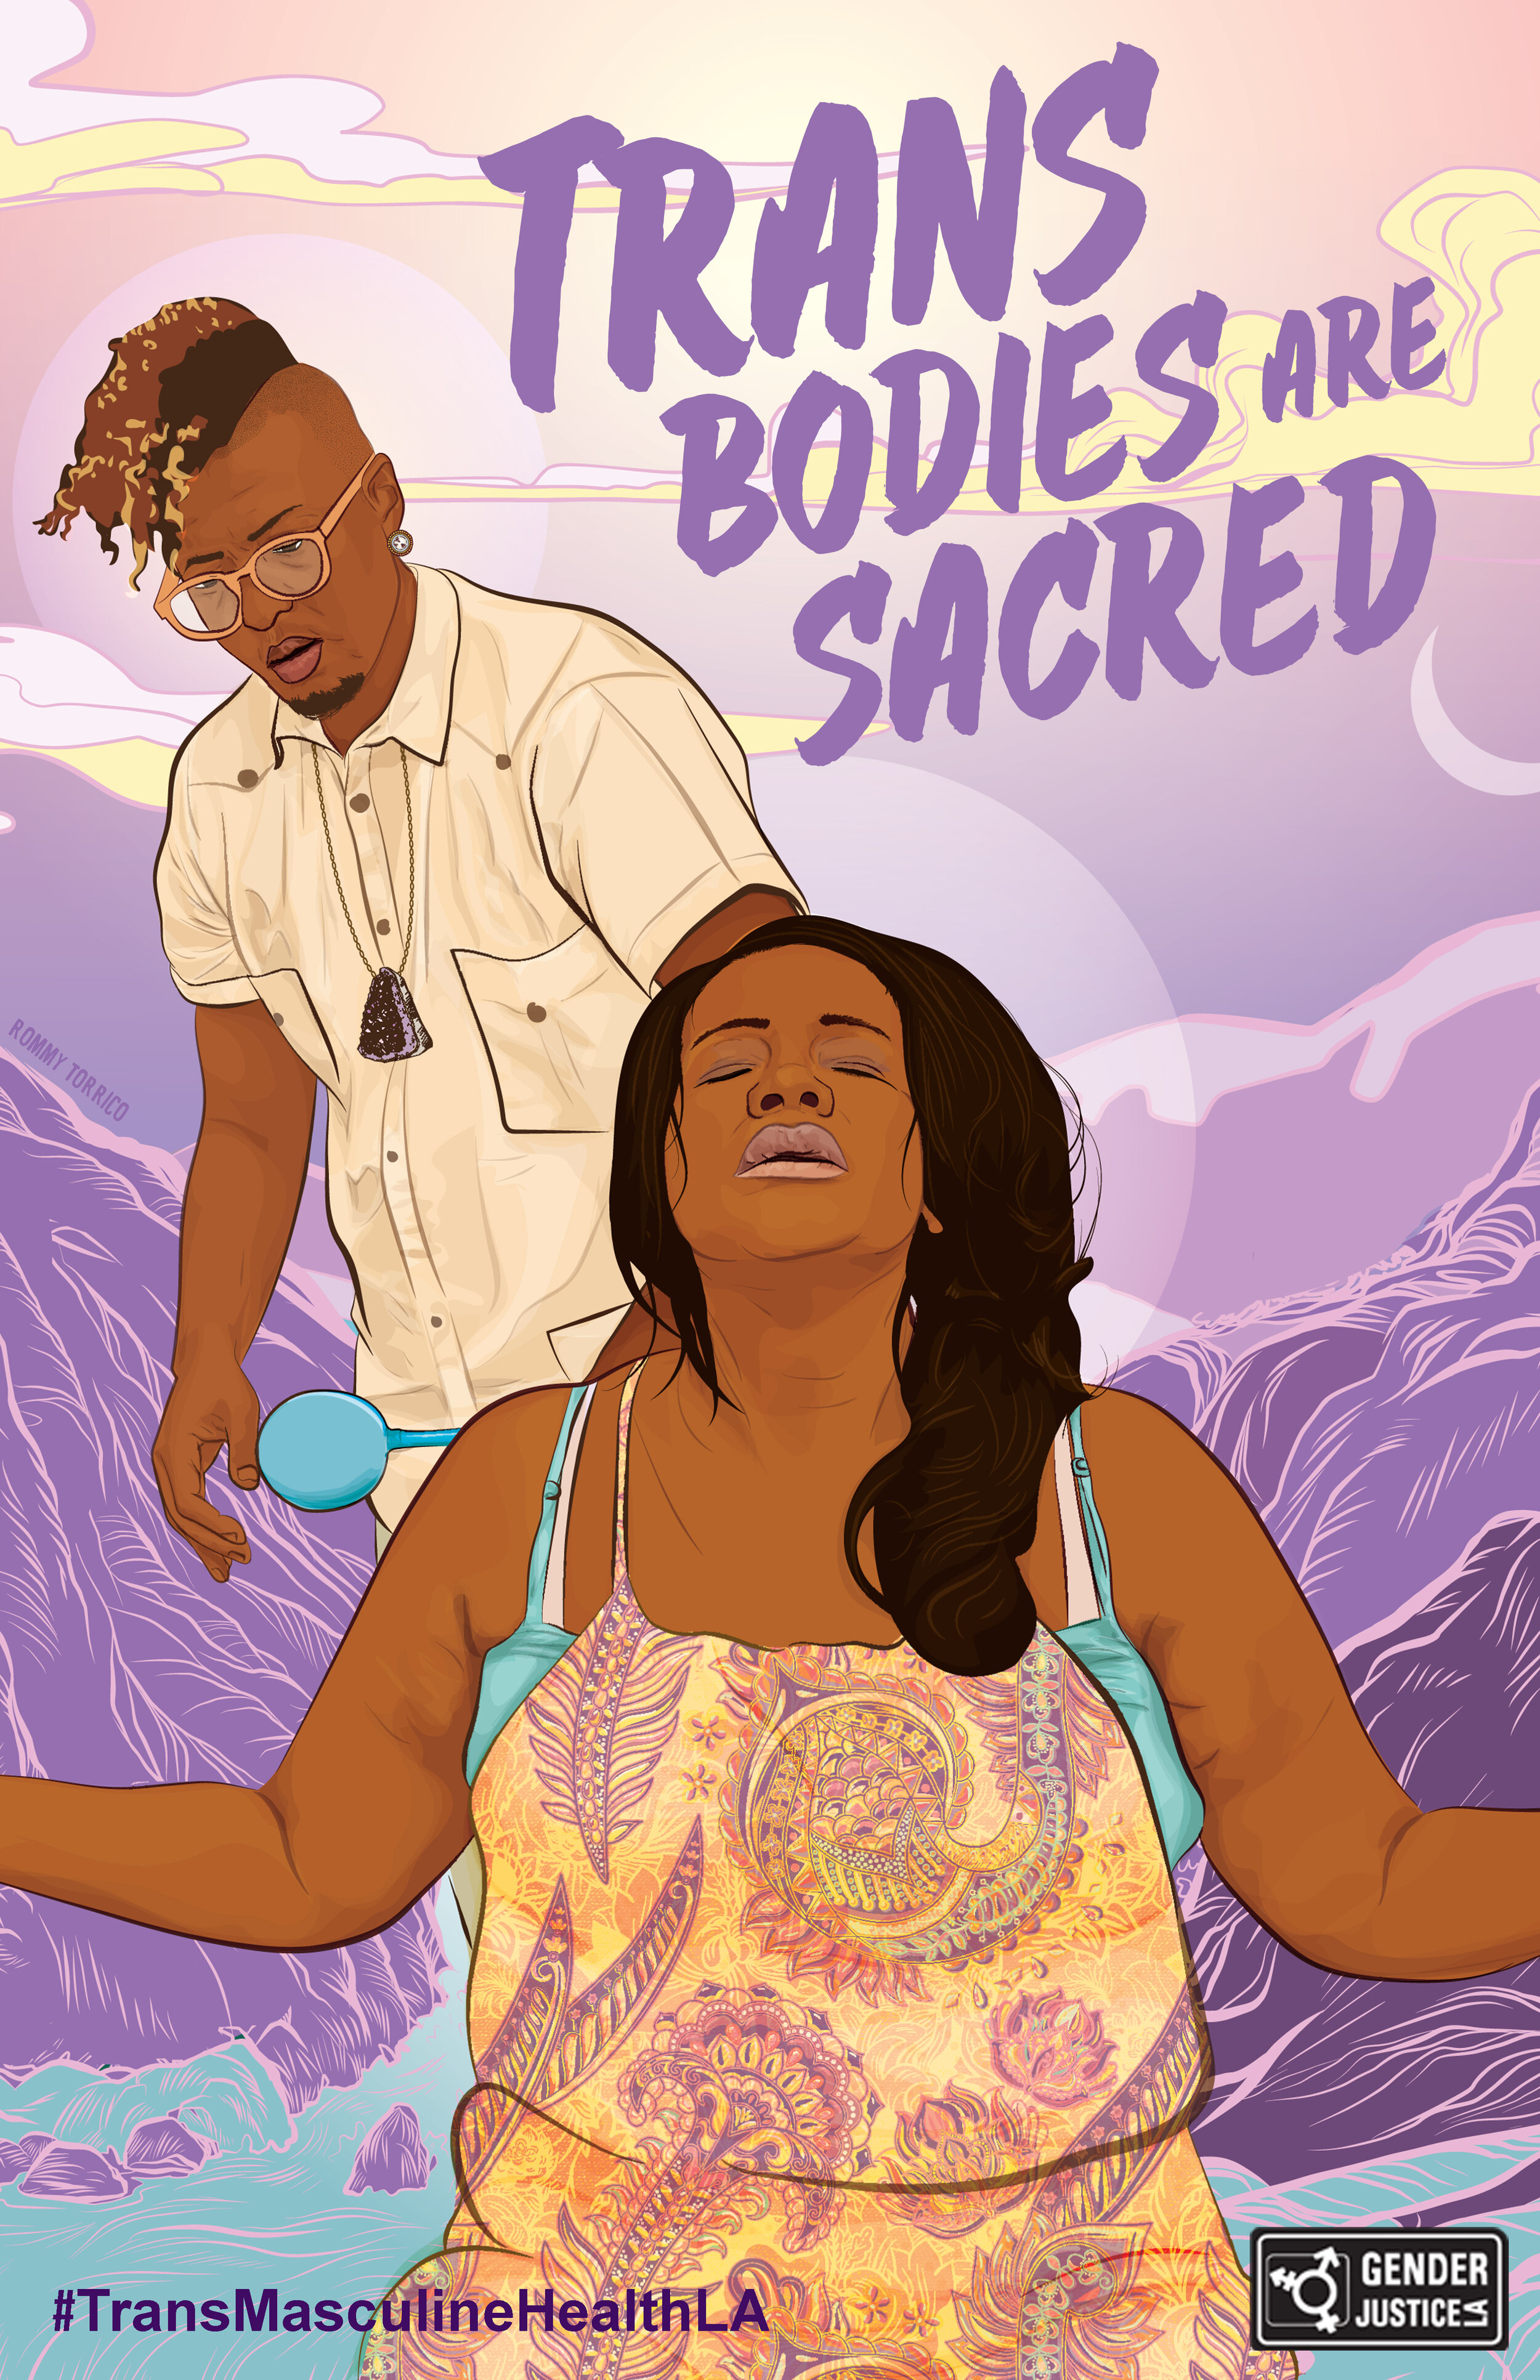 Trans Bodies Are Sacred